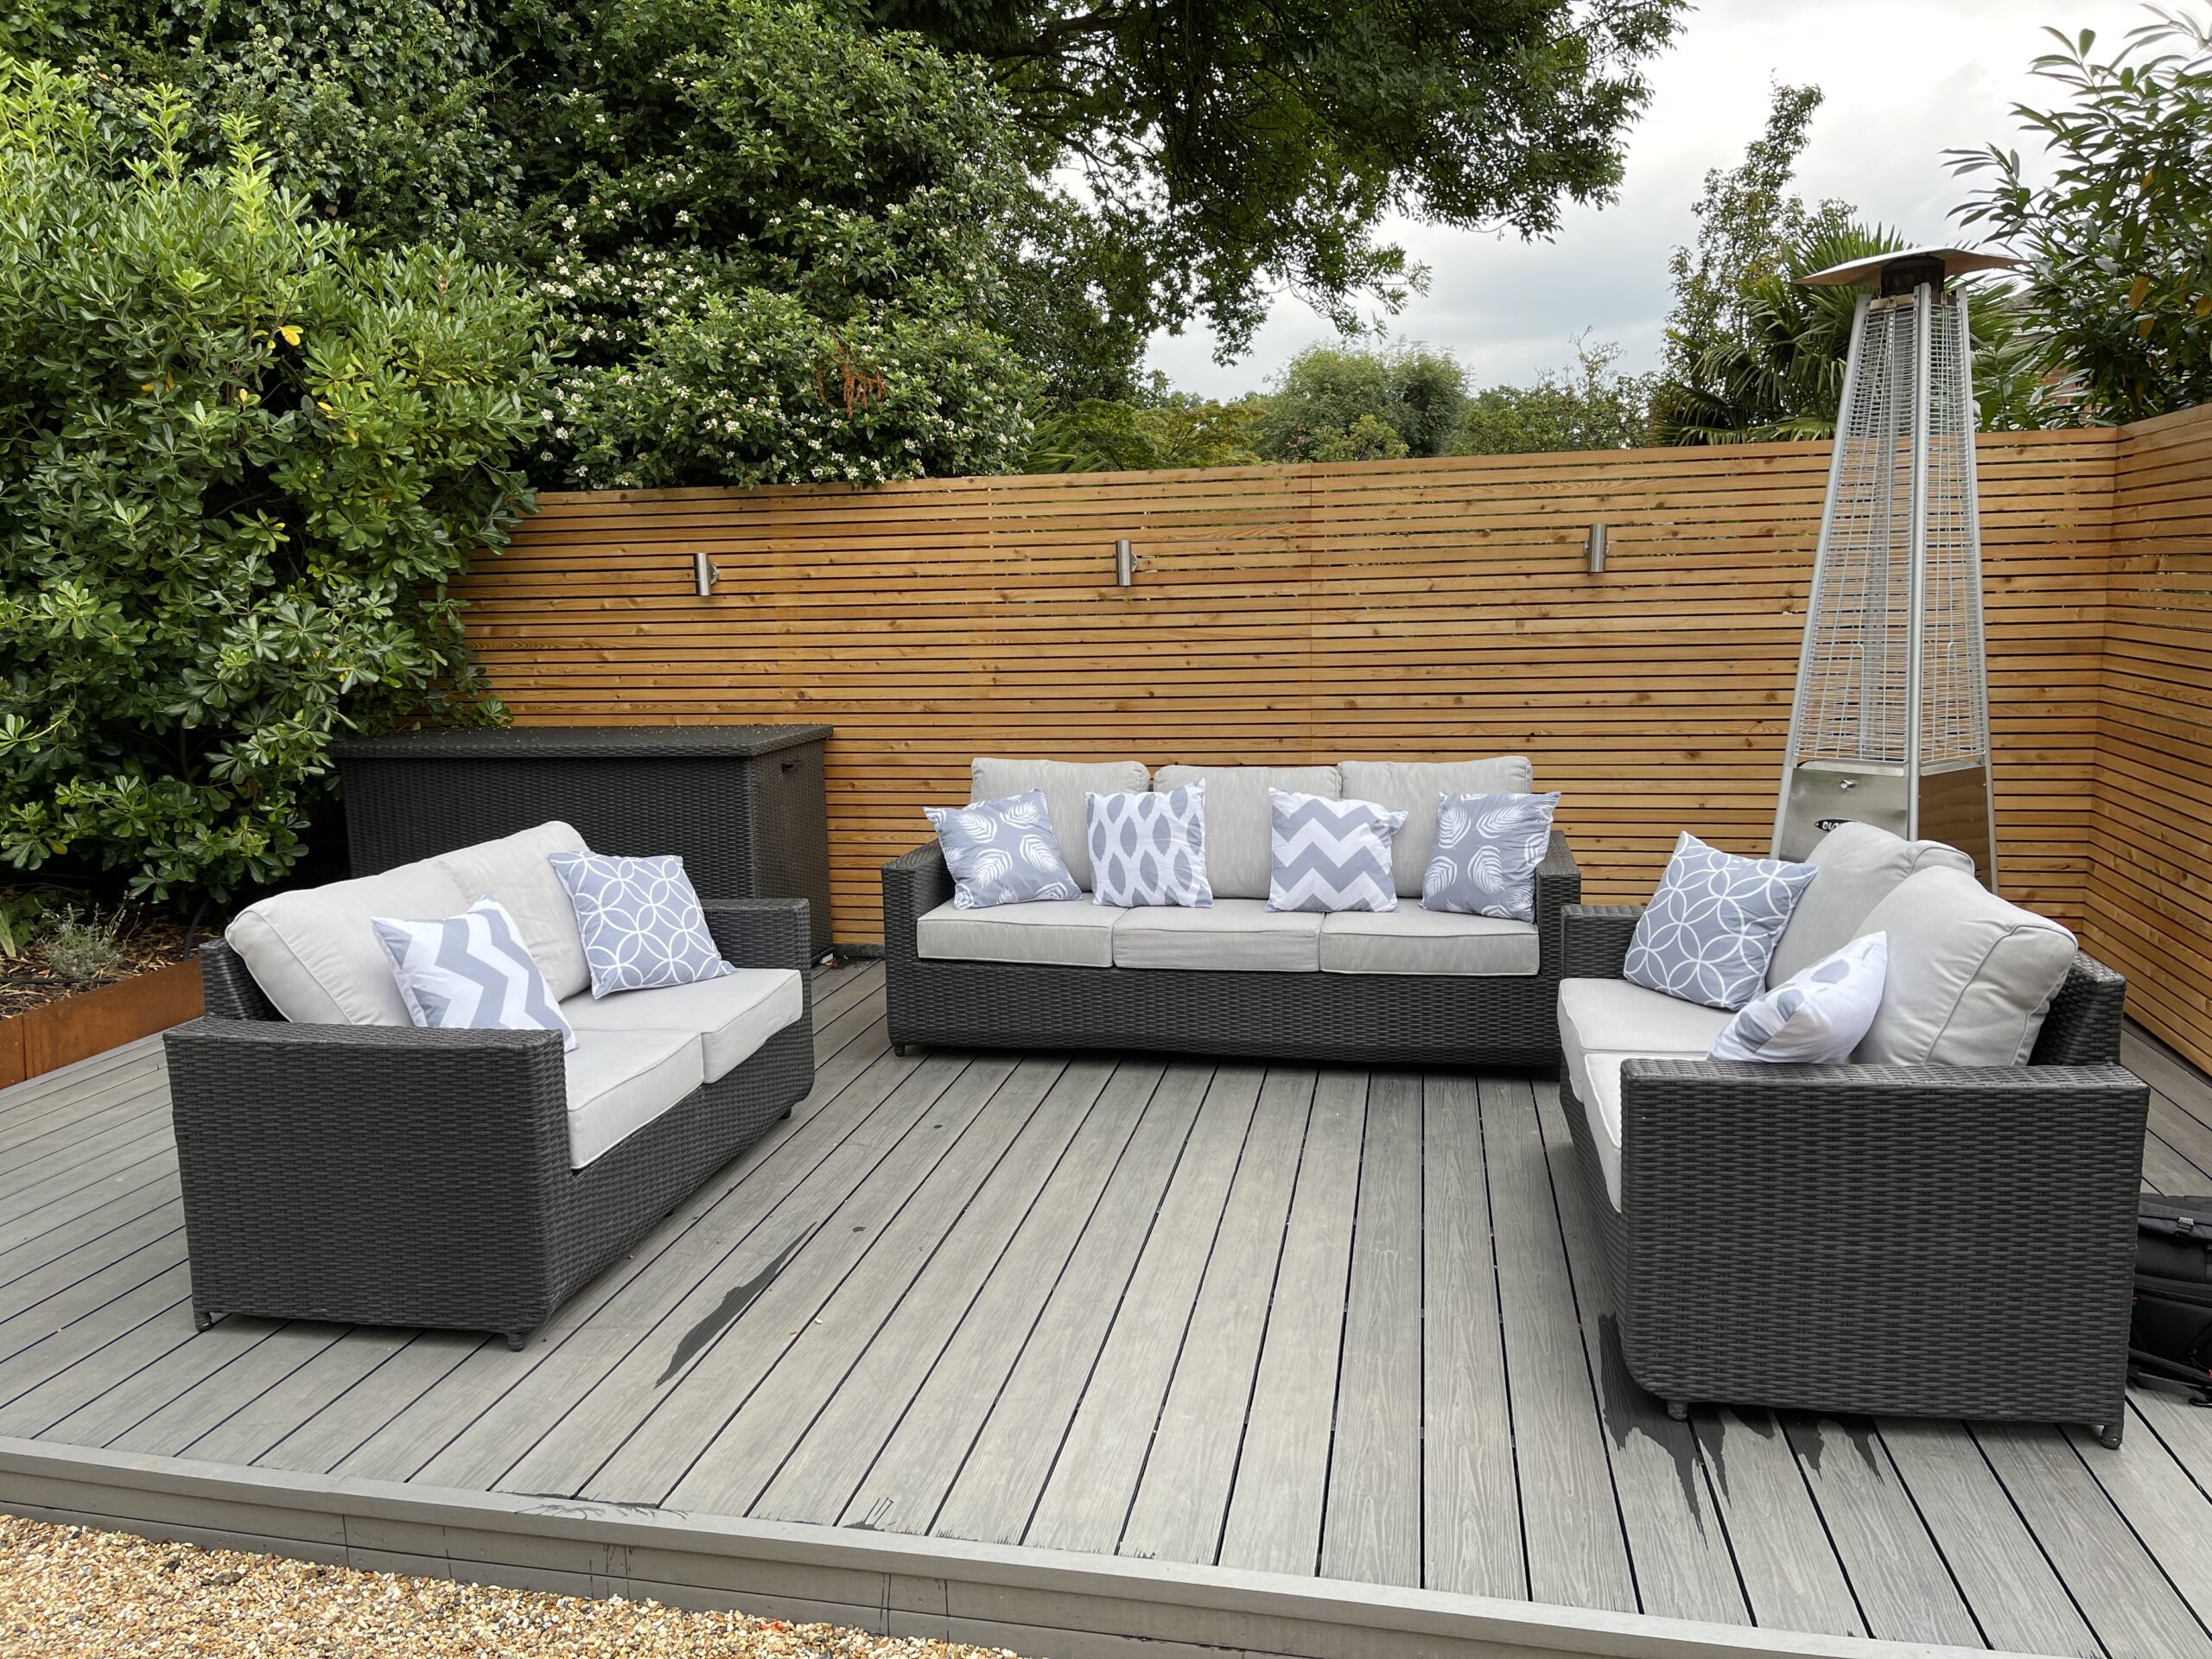 A grey wooden tiled patio with a 9-seater rattan garden furniture set at an outdoor heater surrounded by a modern wooden fence designed by Willow Alexander